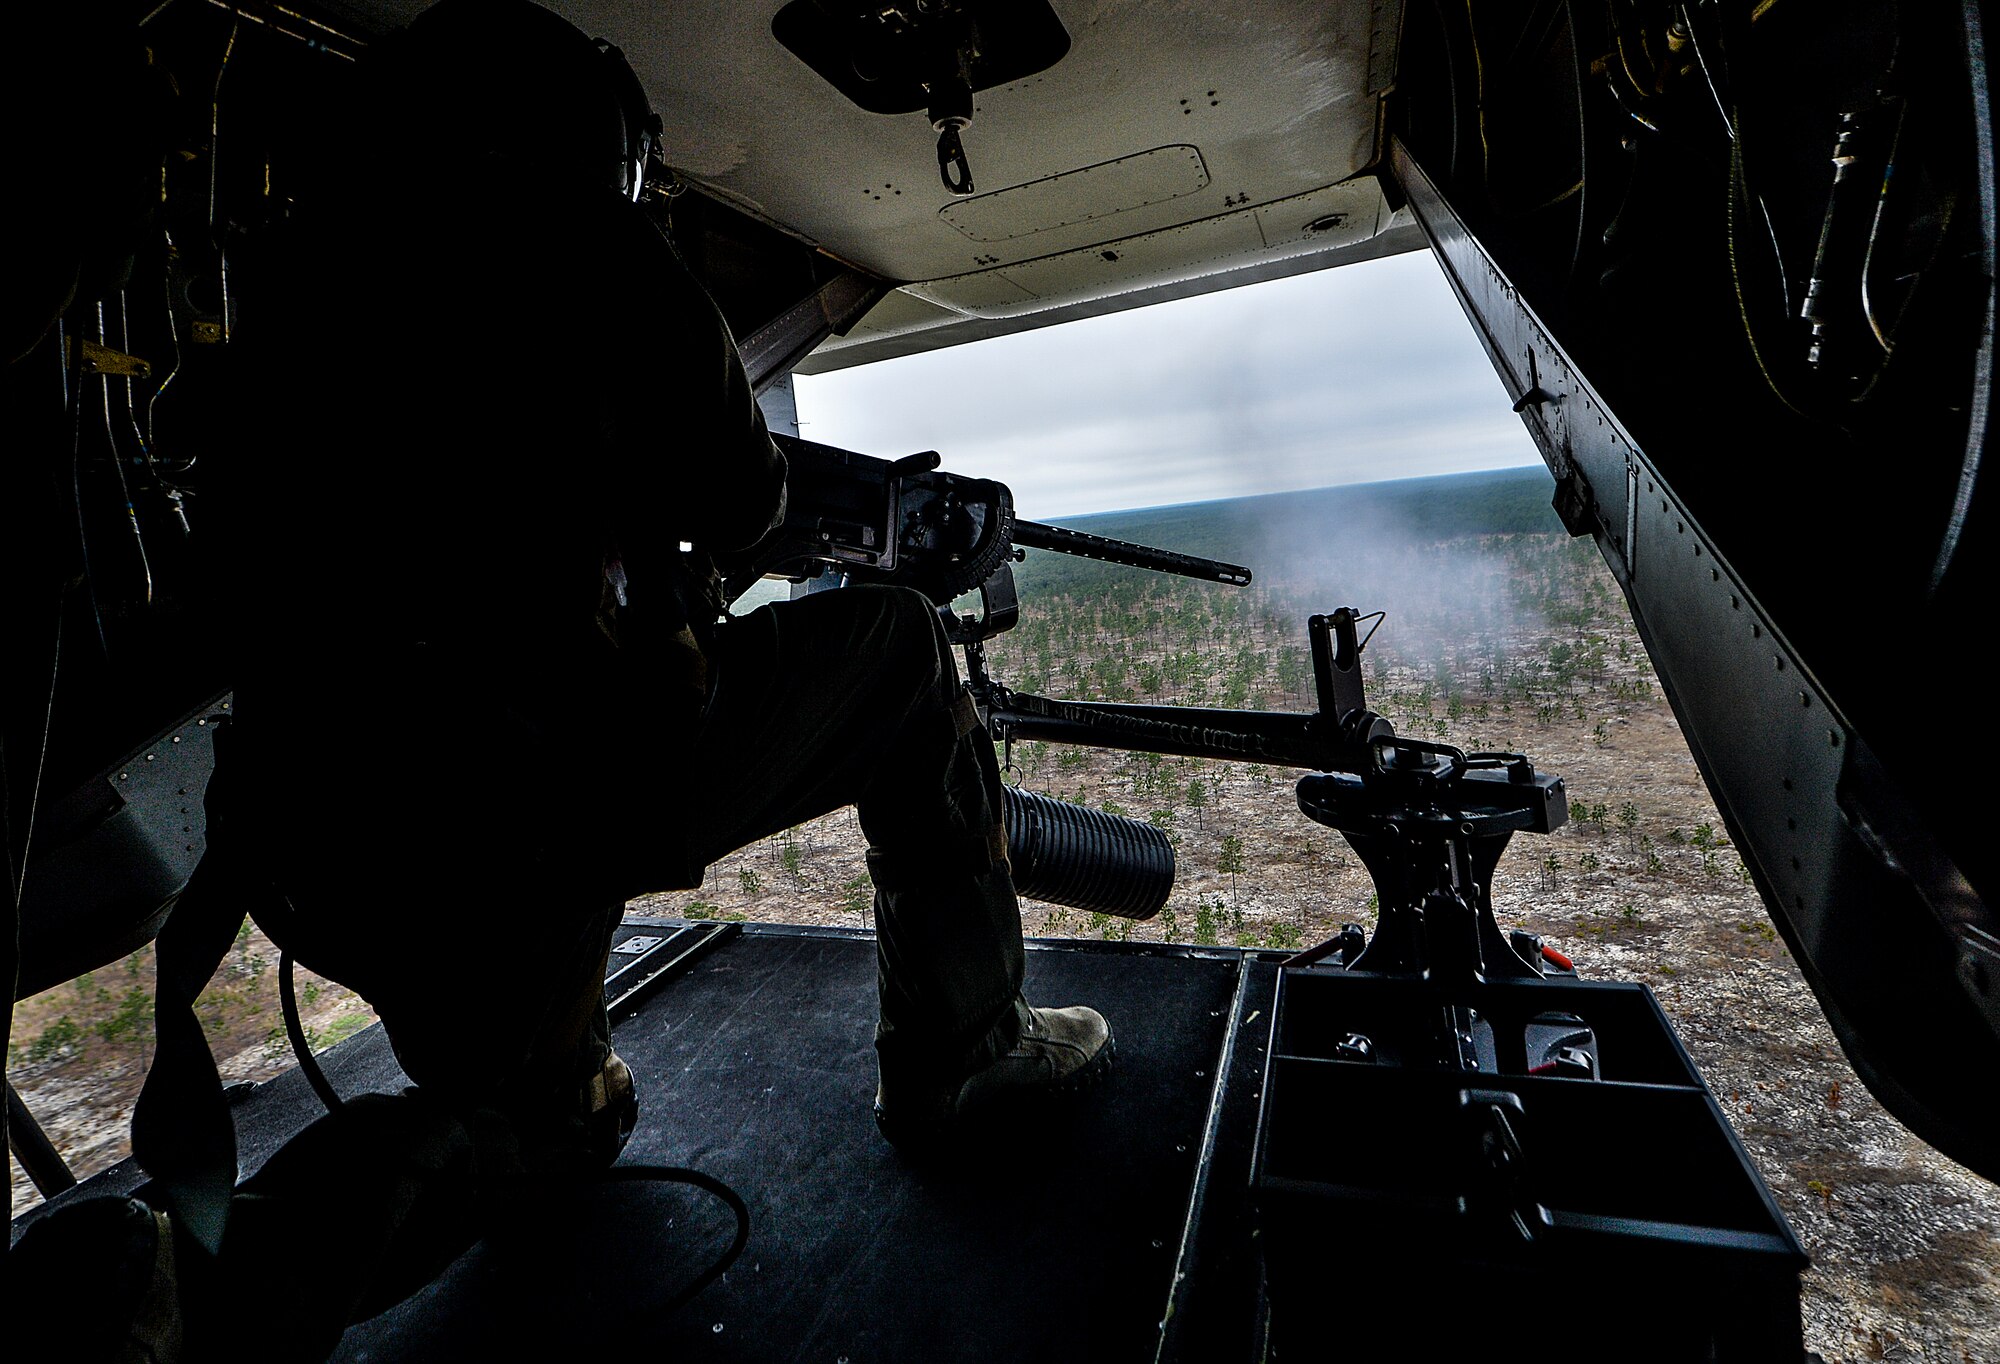 Tech. Sgt. Edilberto Malave, 8th Special Operations Squadron flight engineer, shoots a .50 caliber machine gun mounted to the ramp of a CV-22 Osprey near Hurlburt Field, Fla., March 6, 2014. This versatile, self-deployable aircraft offers increased speed and range over other rotary-wing aircraft, enabling Air Force Special Operations Command aircrews to execute long-range special operations missions.